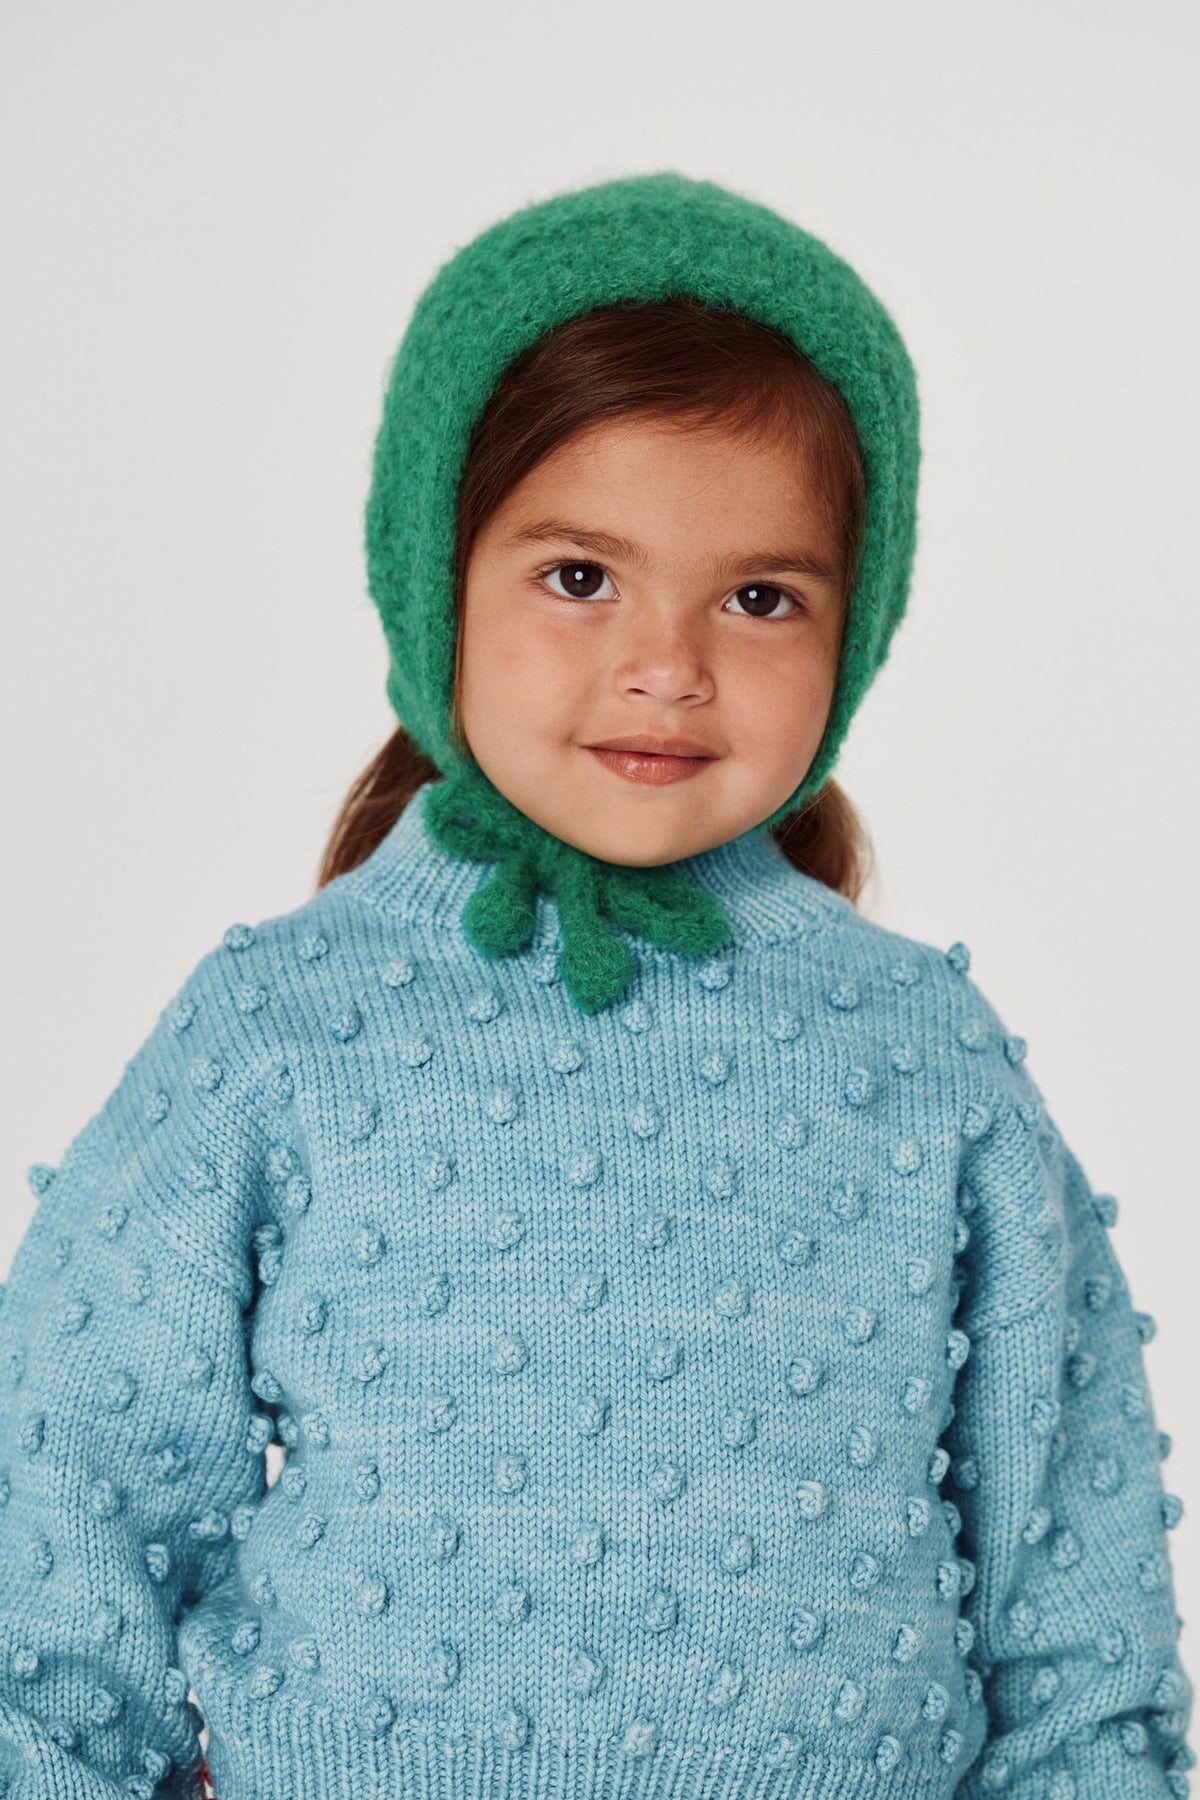 Boucle Garter Bonnet - Emerald+Model is 38 inches tall, 35lbs, wearing a size 2-4y